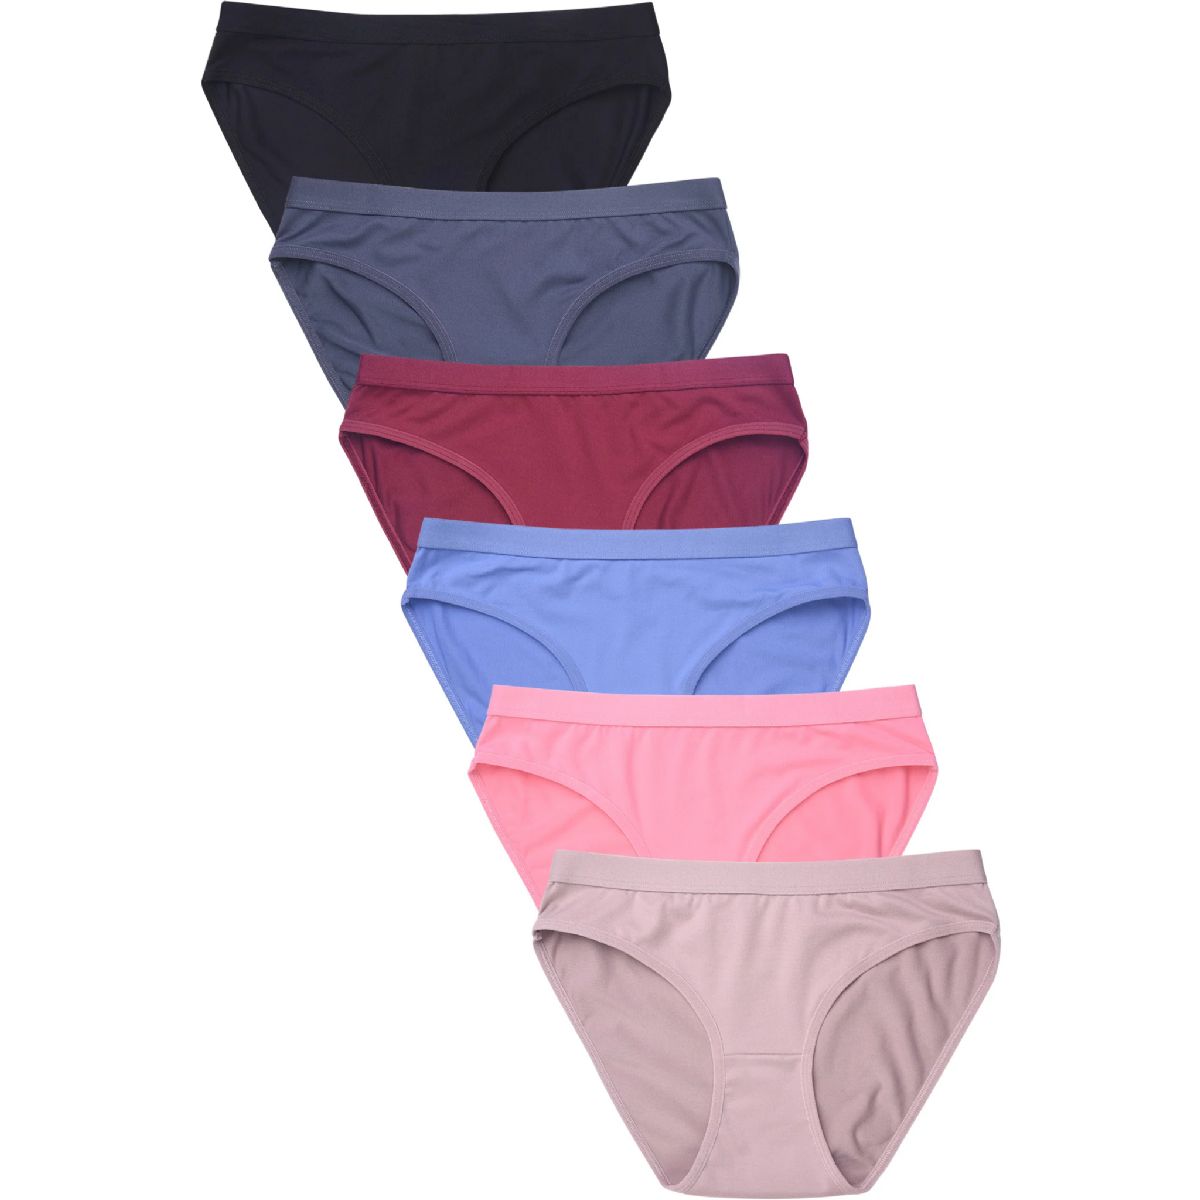 6 Wholesale Yacht & Smith Womens White Underwear, Panties In Bulk, 95%  Cotton - Size 2xl - at 